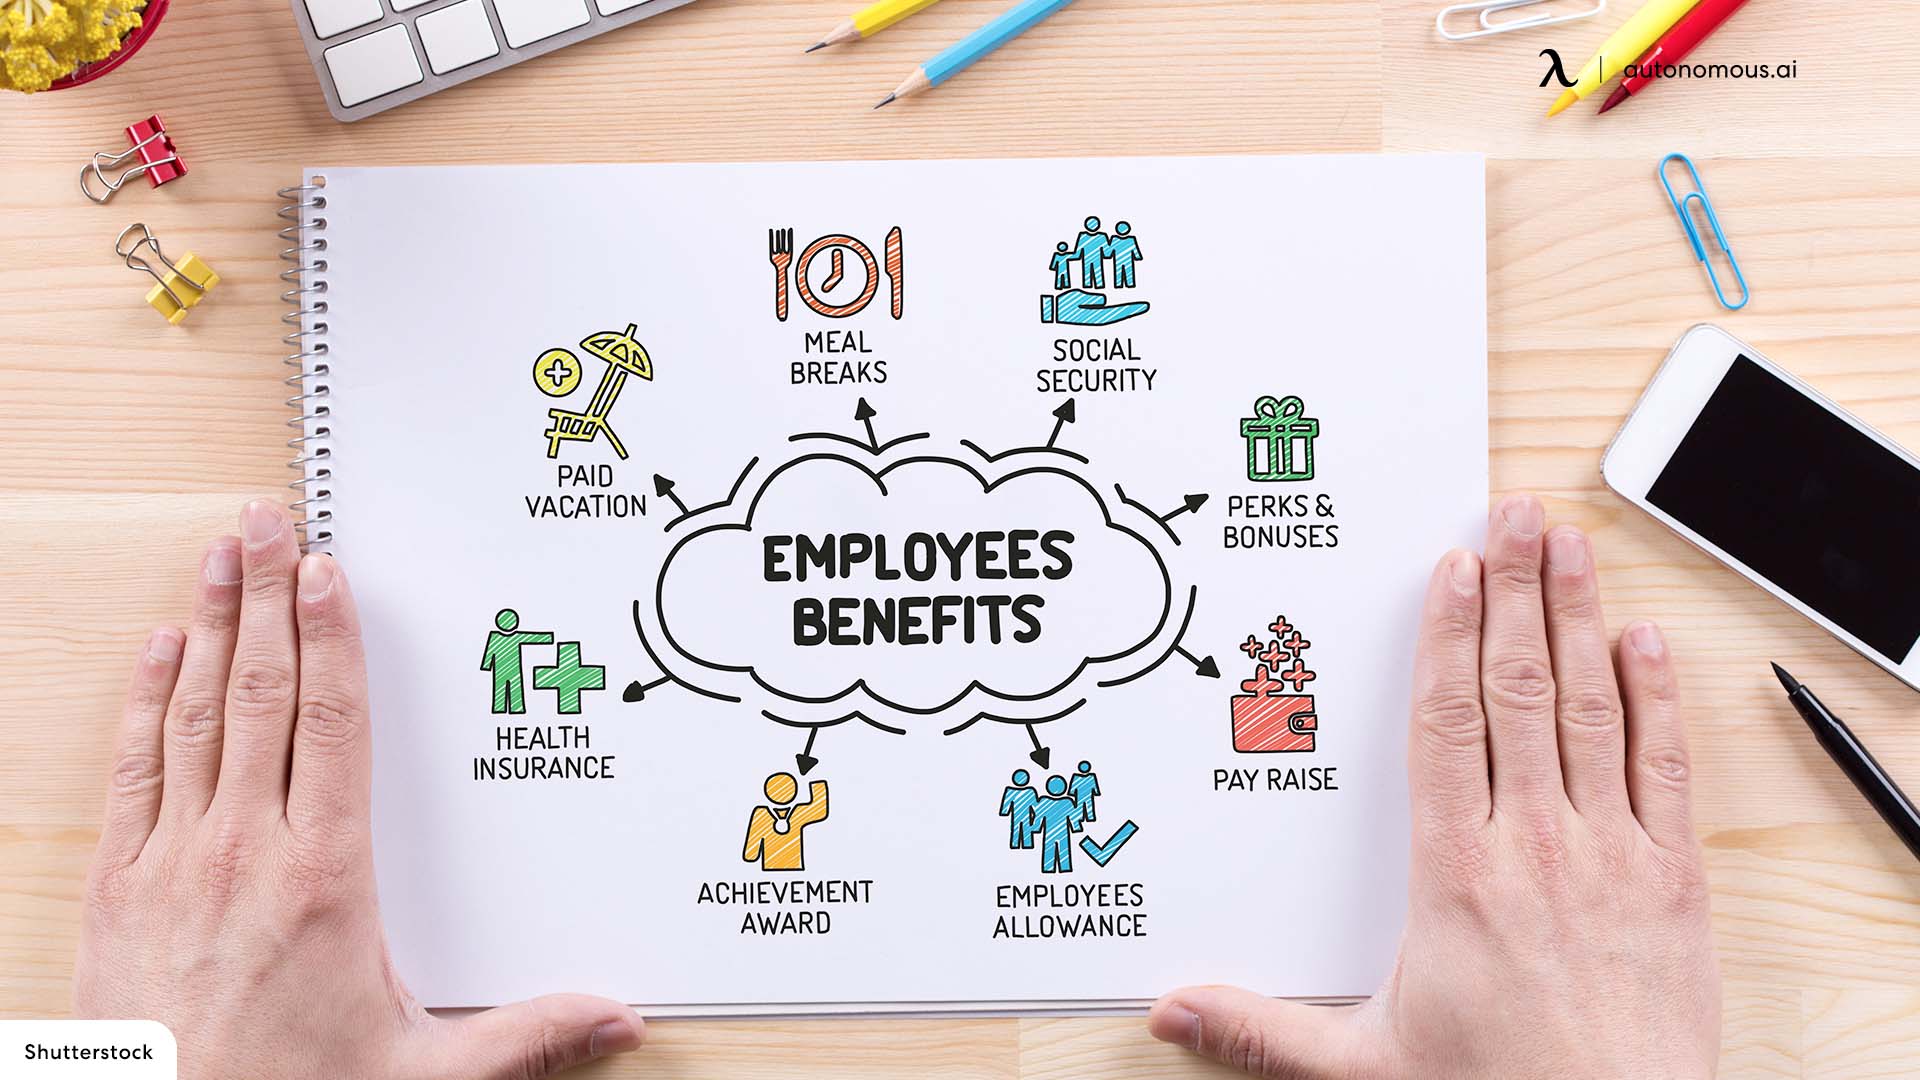 Goal Centric competitive employee benefit